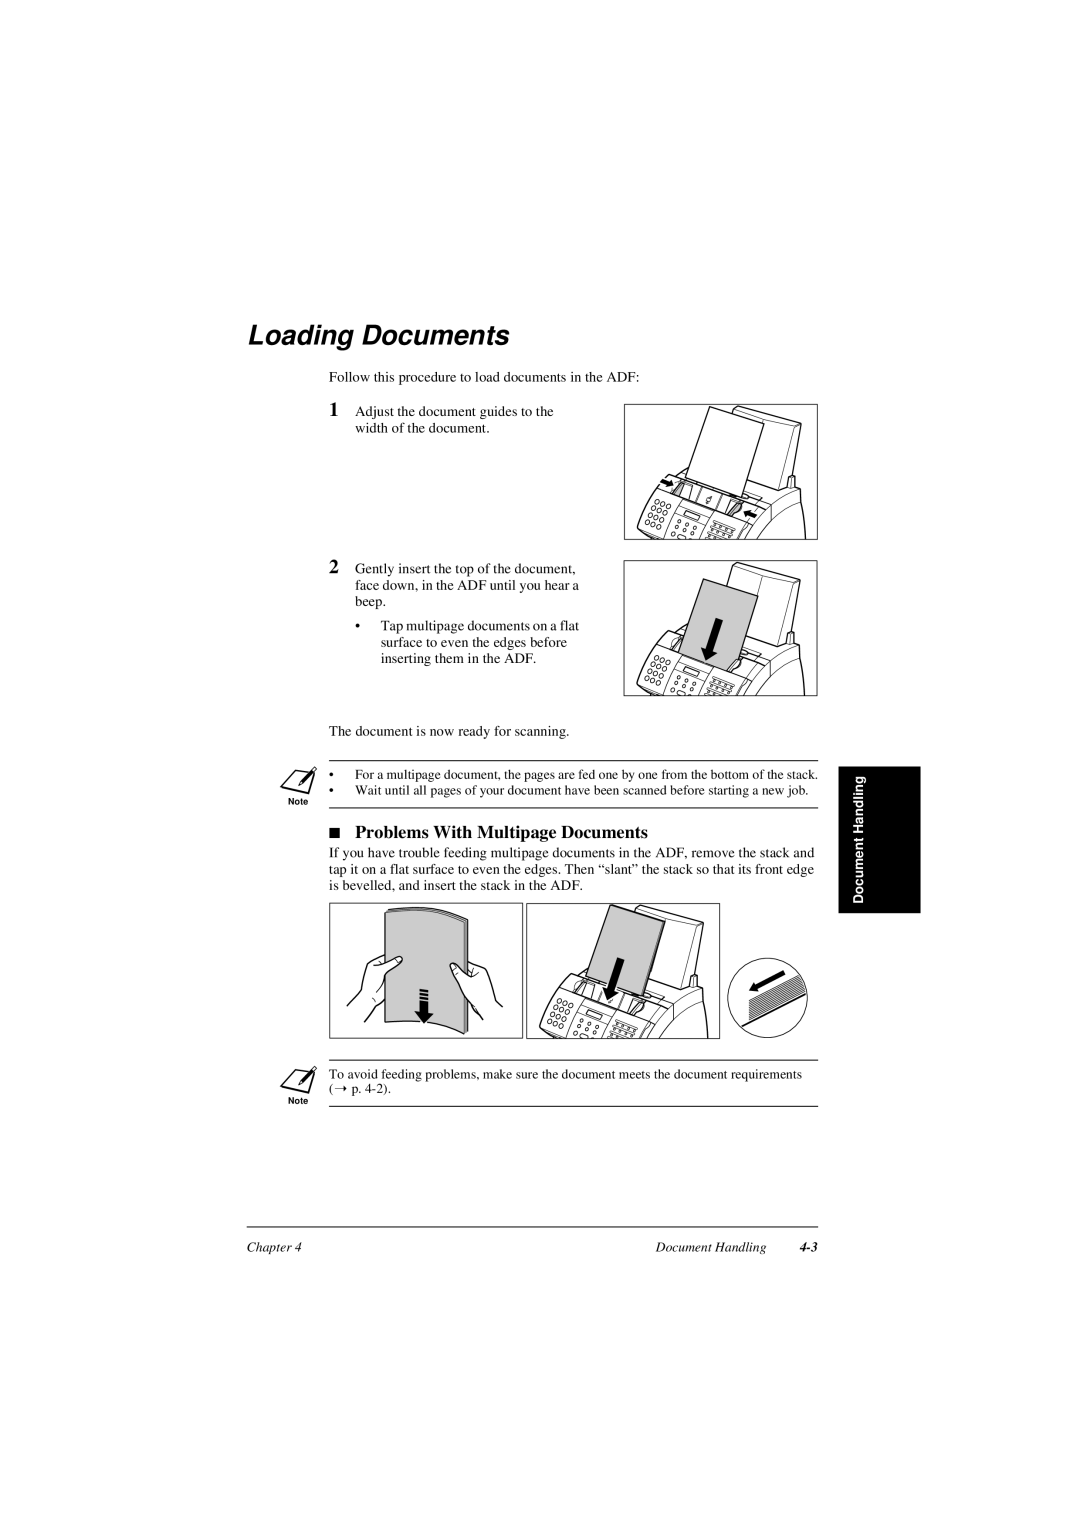 Canon L240, L290 manual Loading Documents, Problems With Multipage Documents 